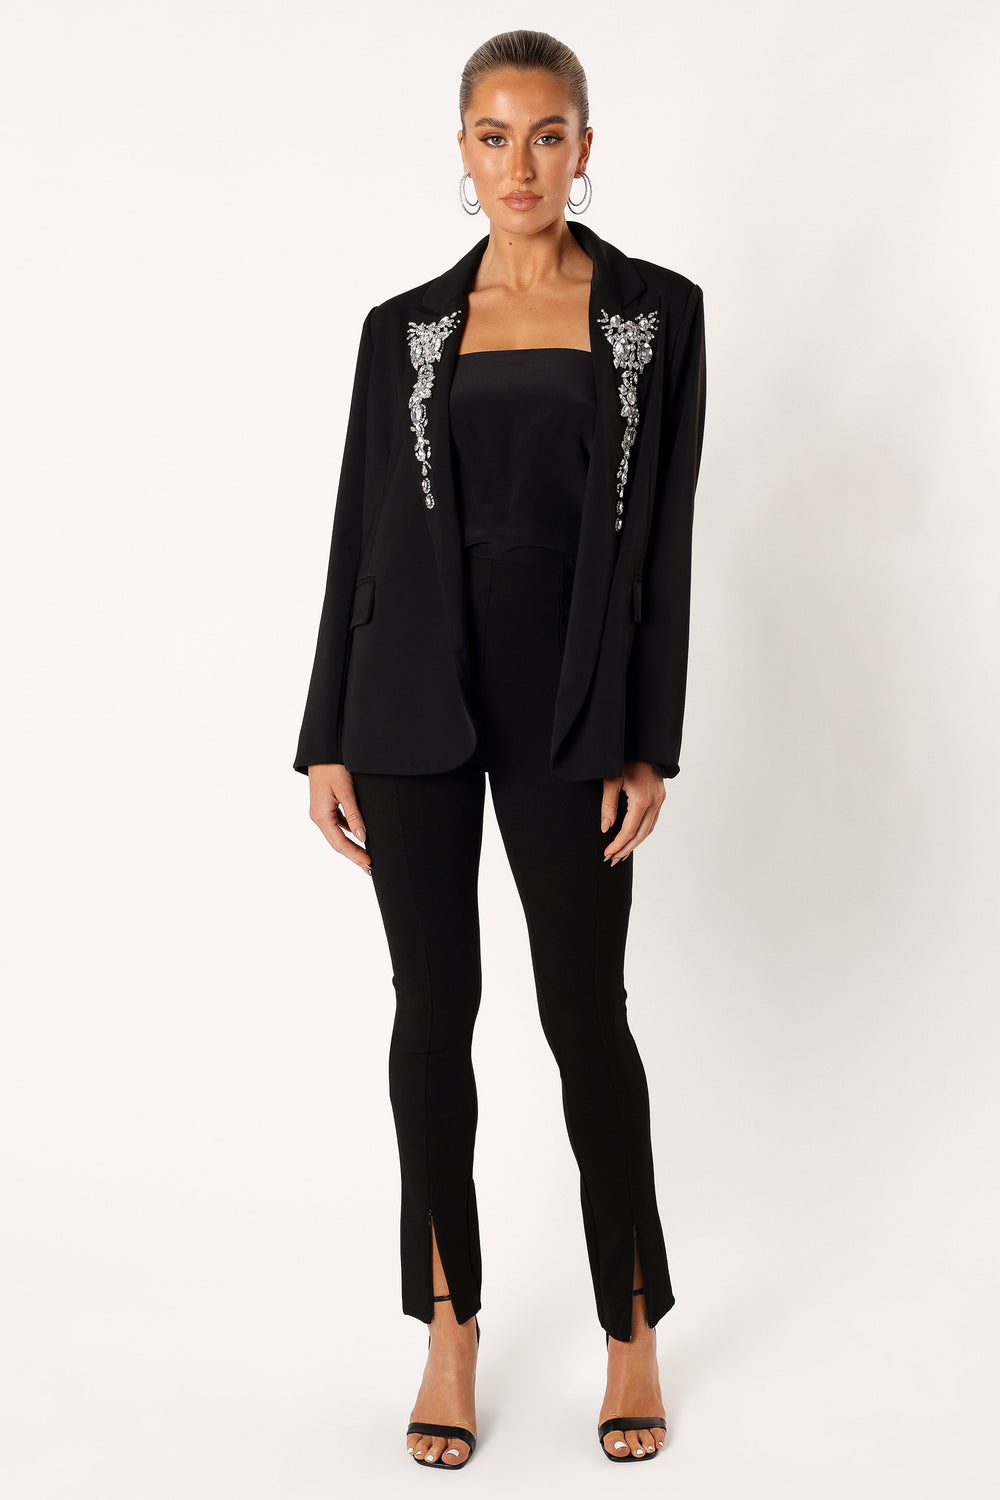 Petal and Pup USA OUTERWEAR Aubree Embellished Blazer - Black